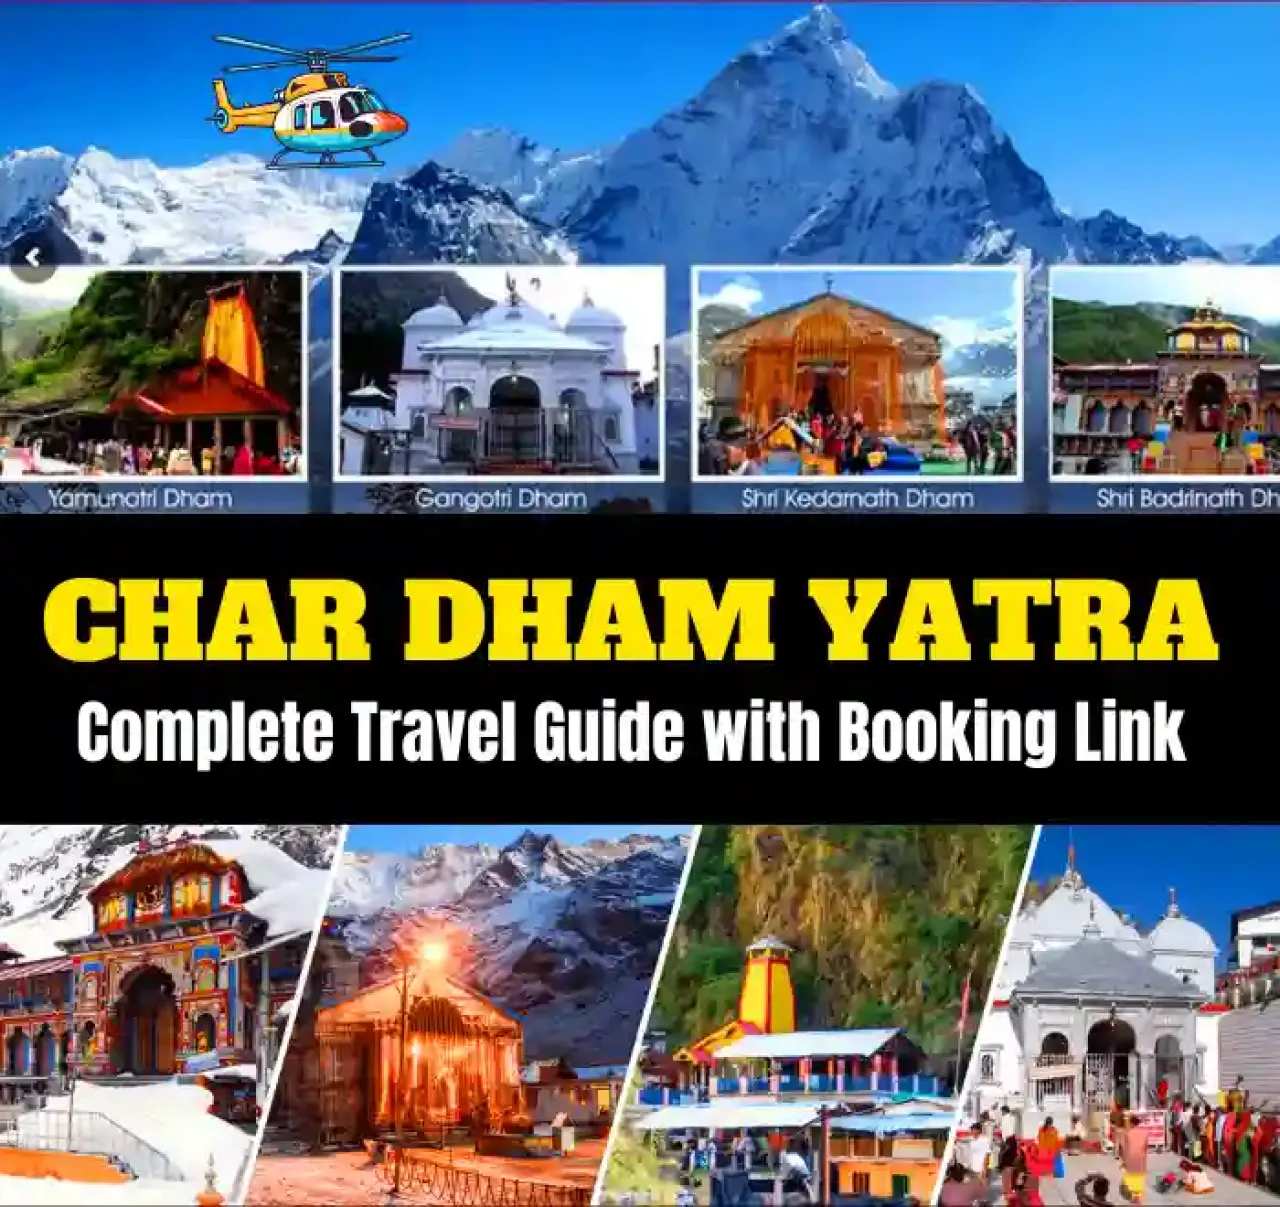 Char Dham Yatra Complete Travel Guide with Booking Link